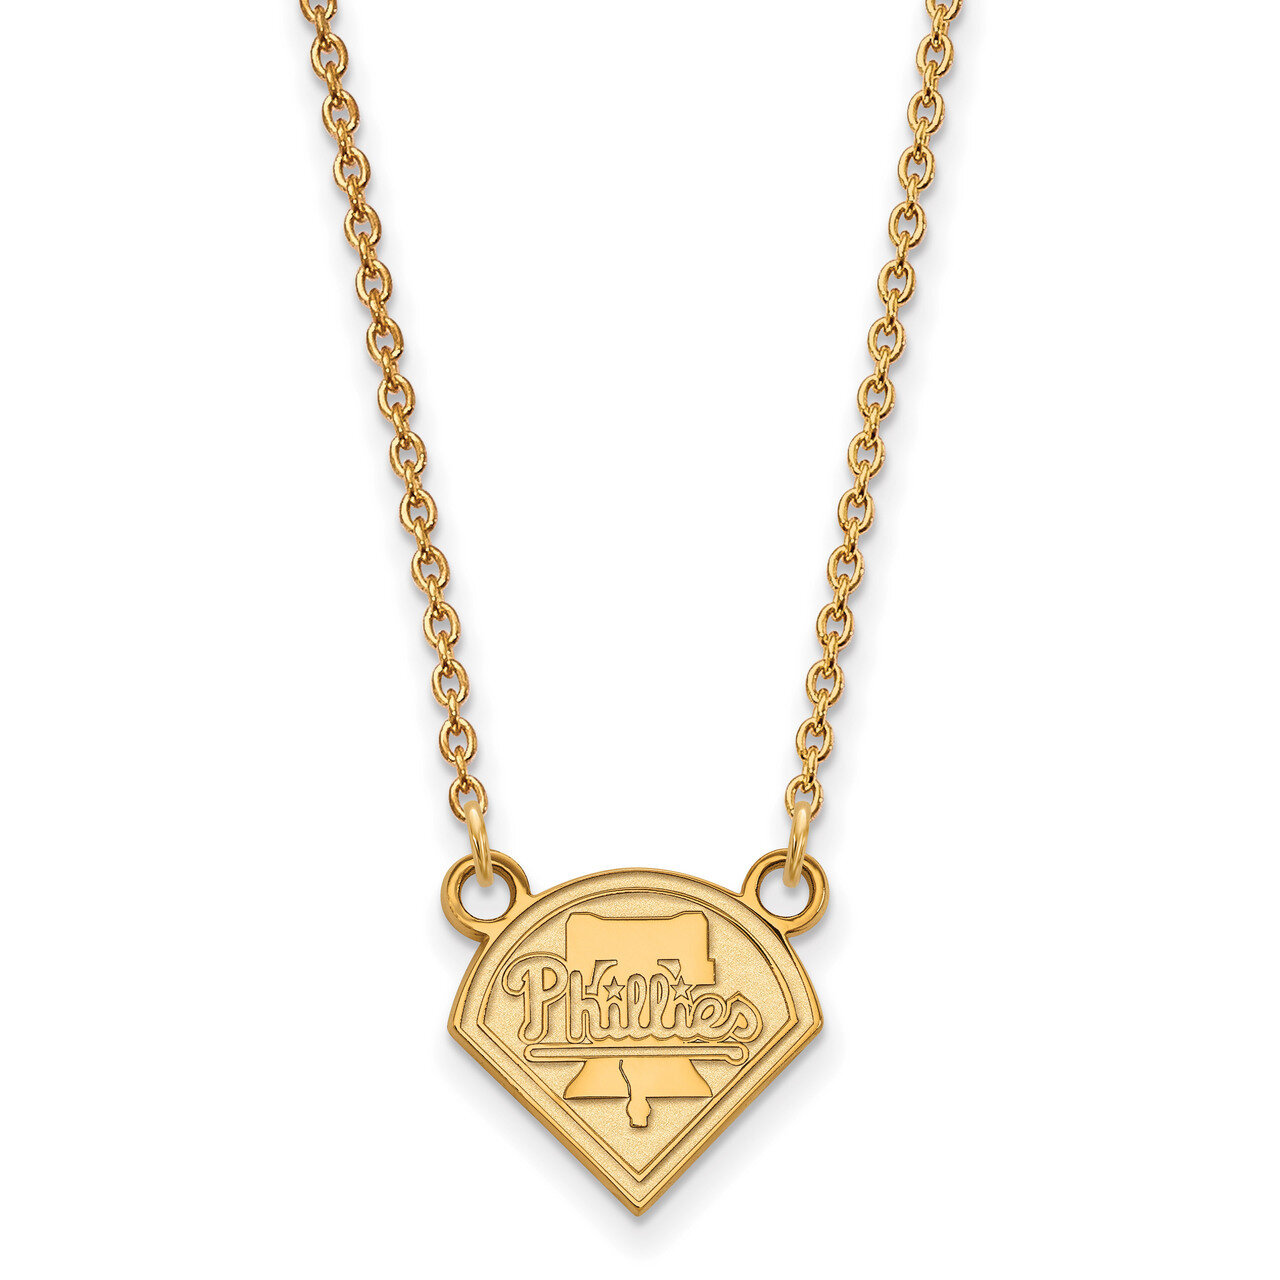 MLB Philadelphia Phillies Sm Pend with Necklace 10k Yellow Gold 1Y006PHI-18